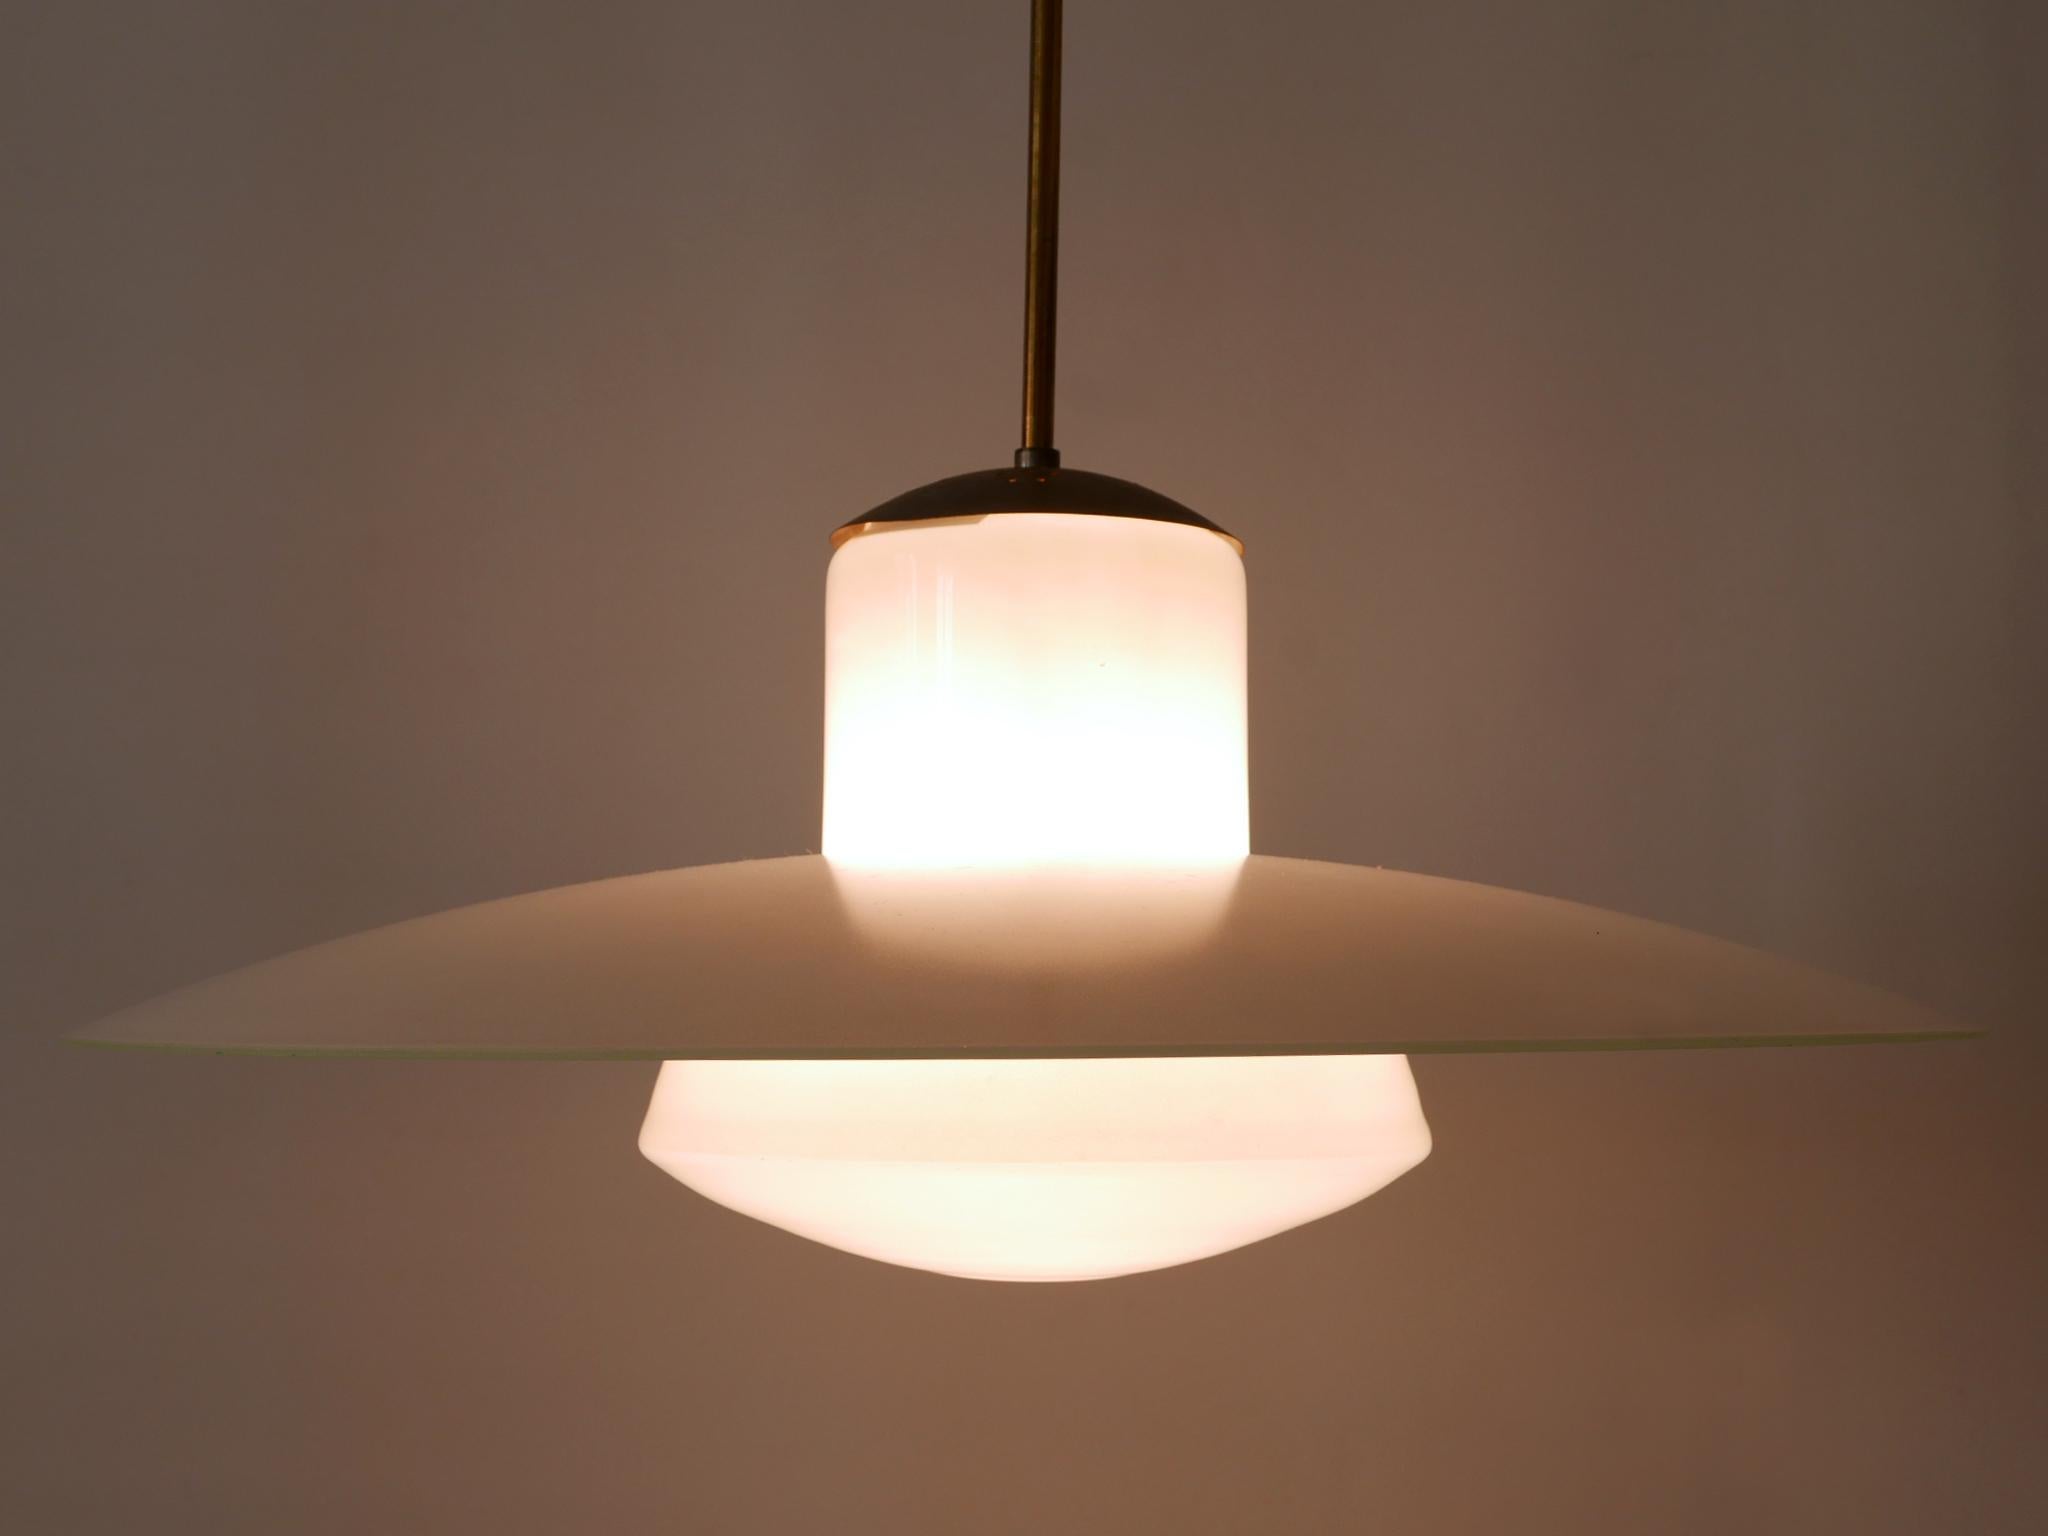 Rare Mid-Century Modern Pendant Lamp by Wolfgang Tümpel for Doria Germany 1950s For Sale 6